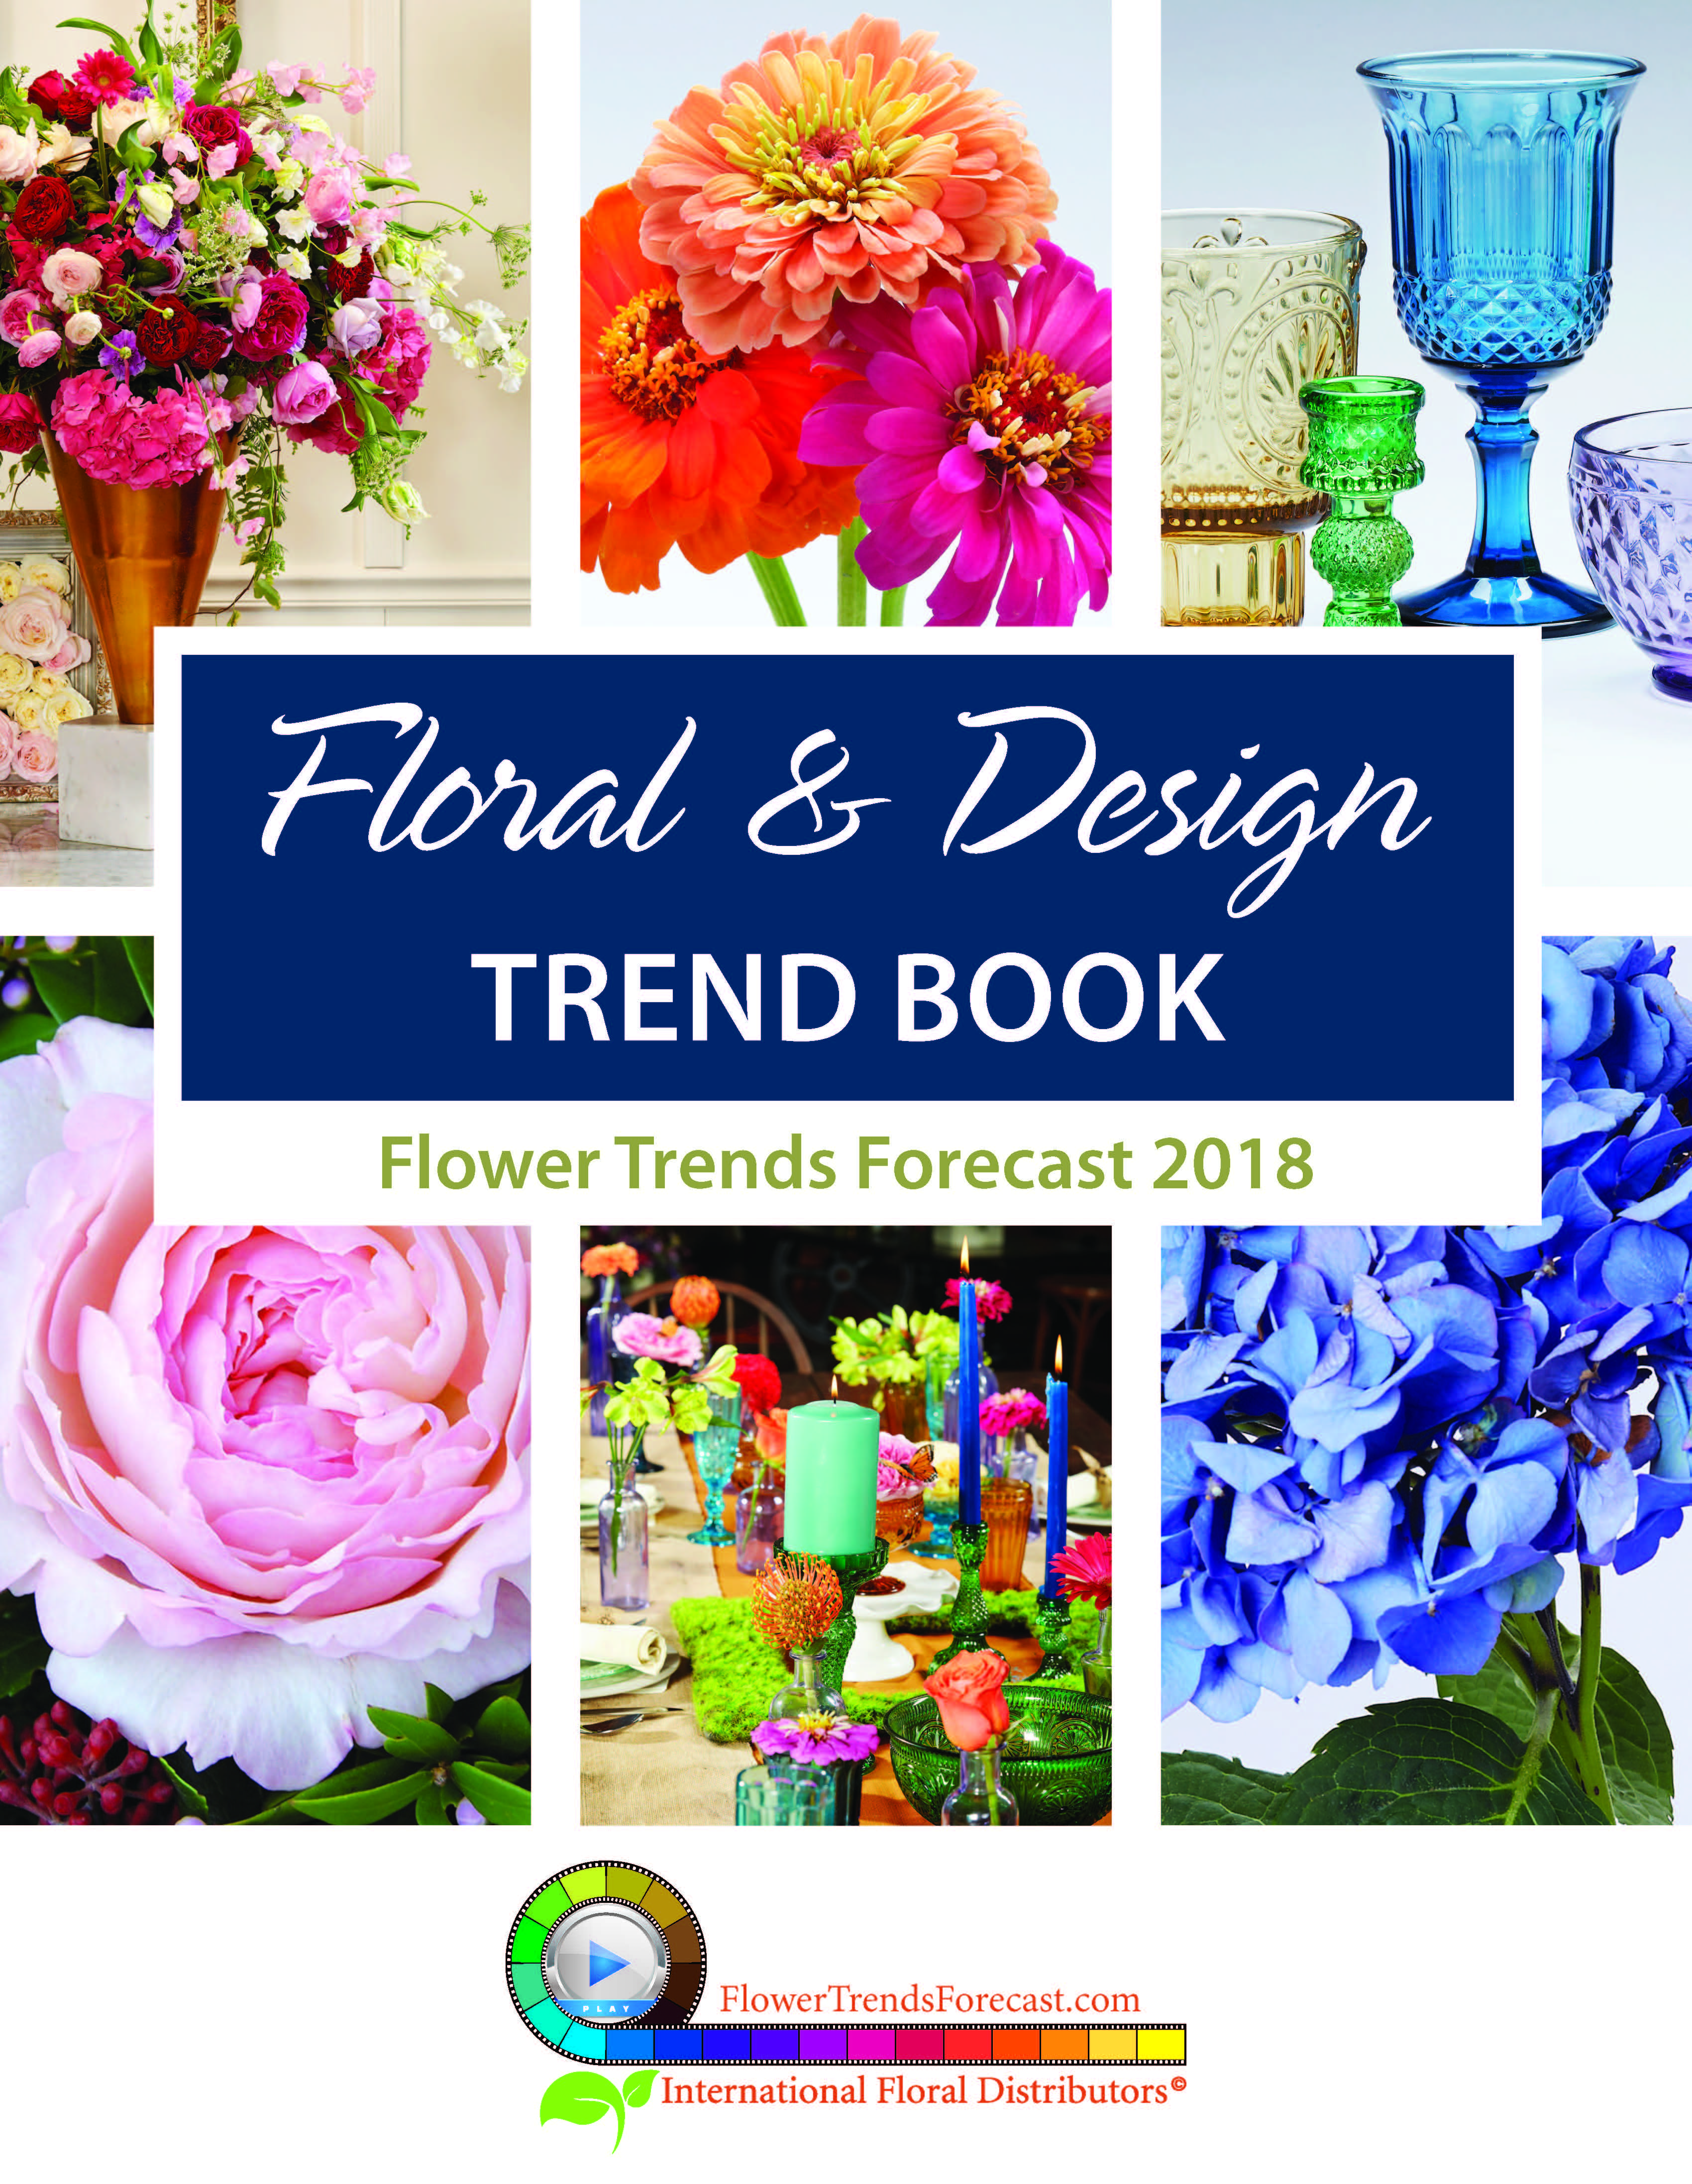 IFD Flower Trends Forecast 2018 Floral & Design Trend Book to be released October 1, 2017.